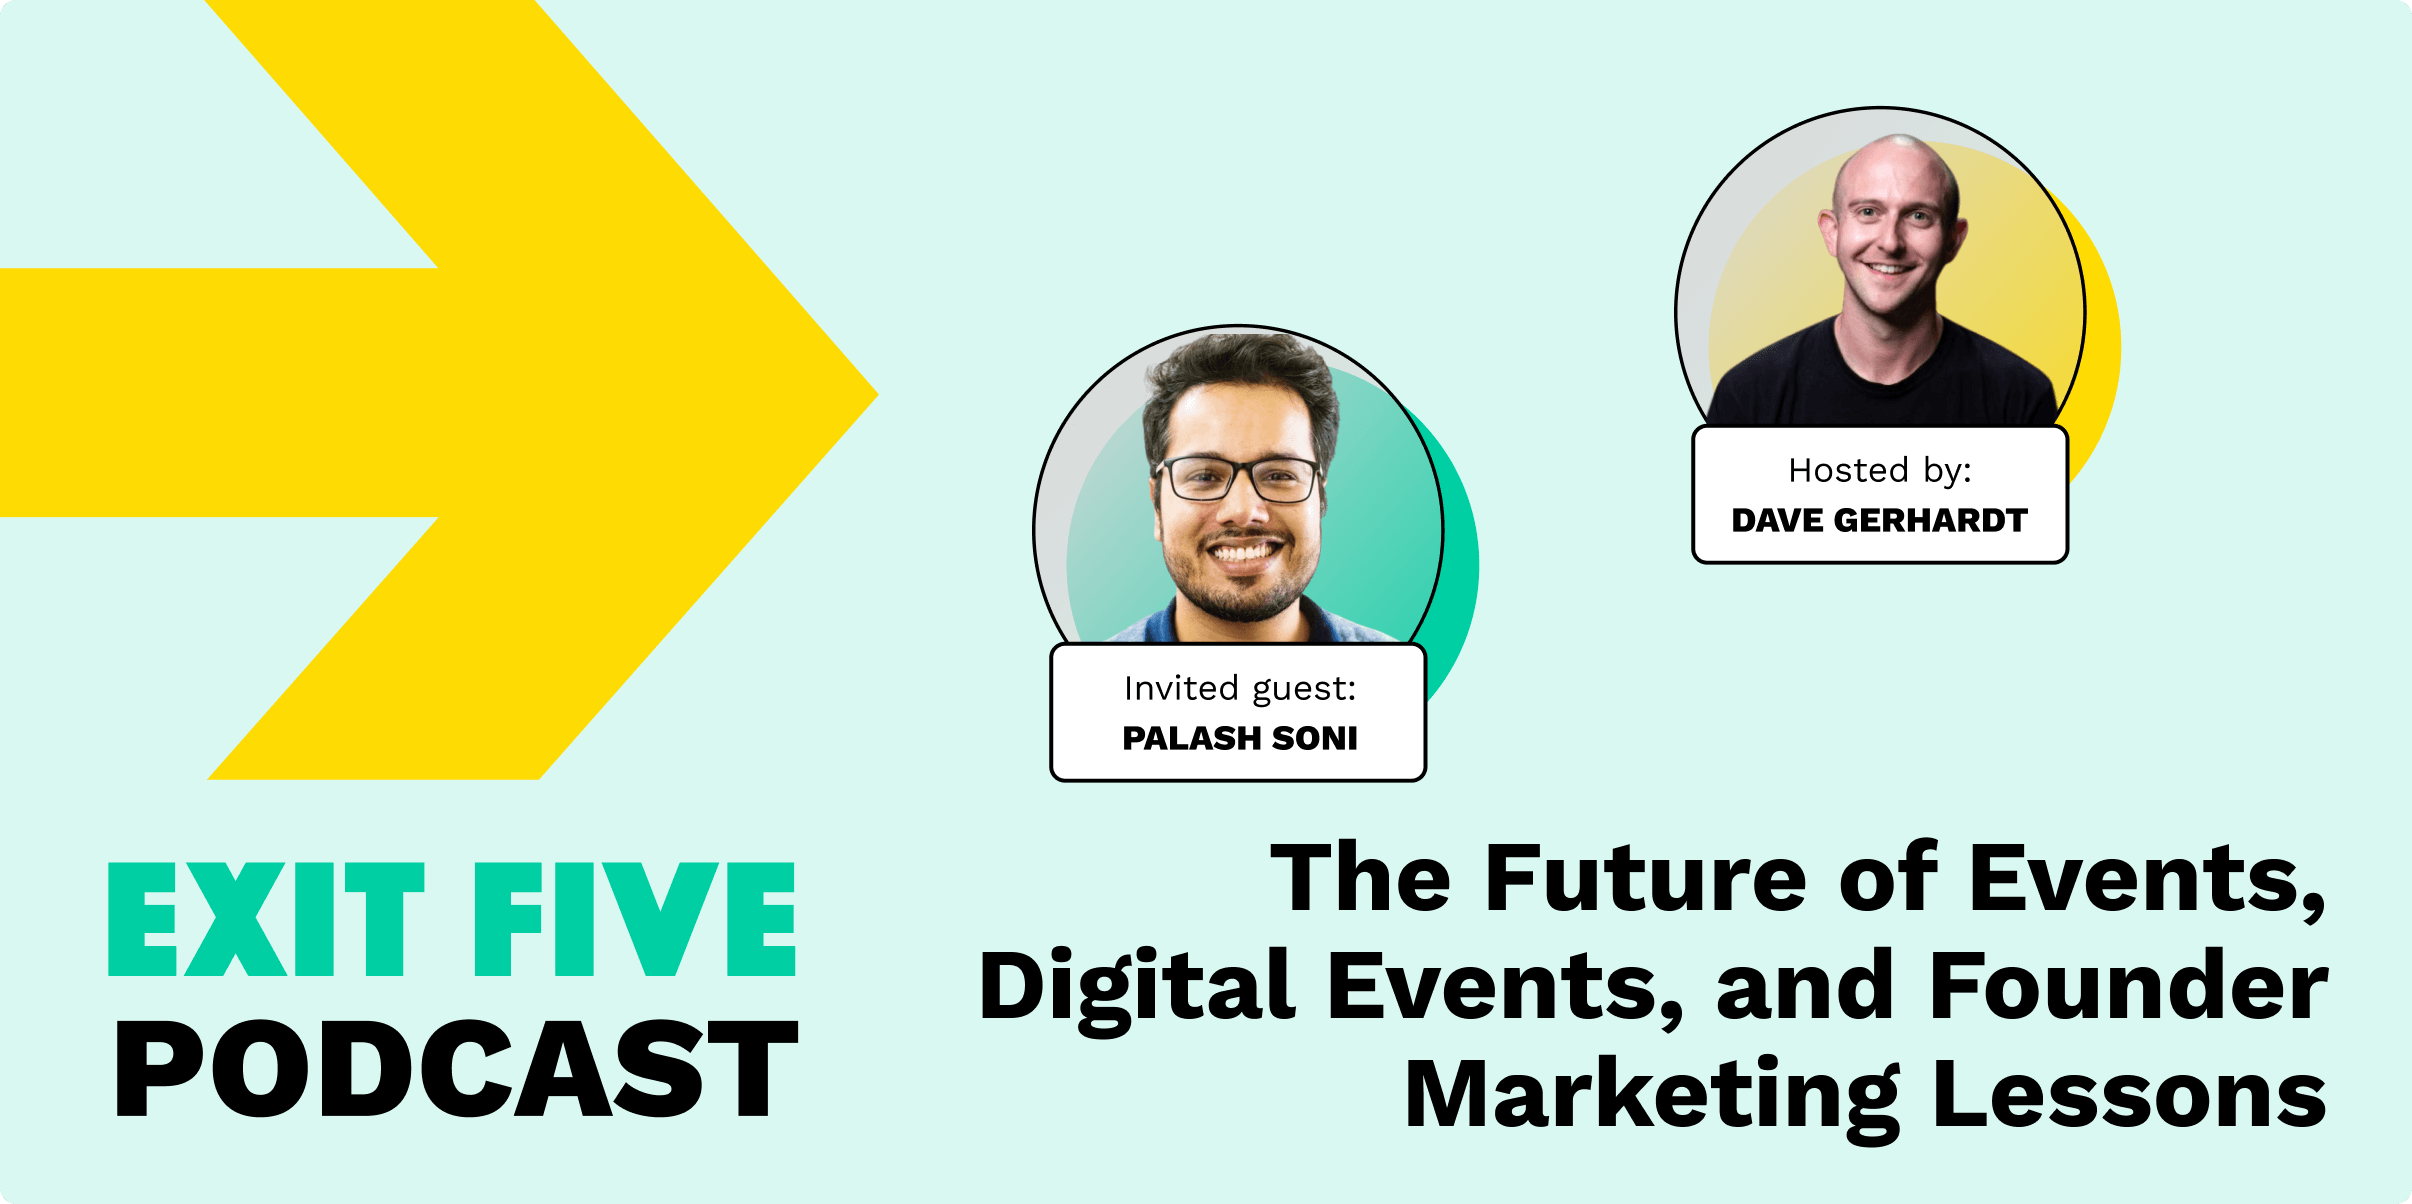 The Future of Events, Digital Events, and Founder Marketing Lessons...